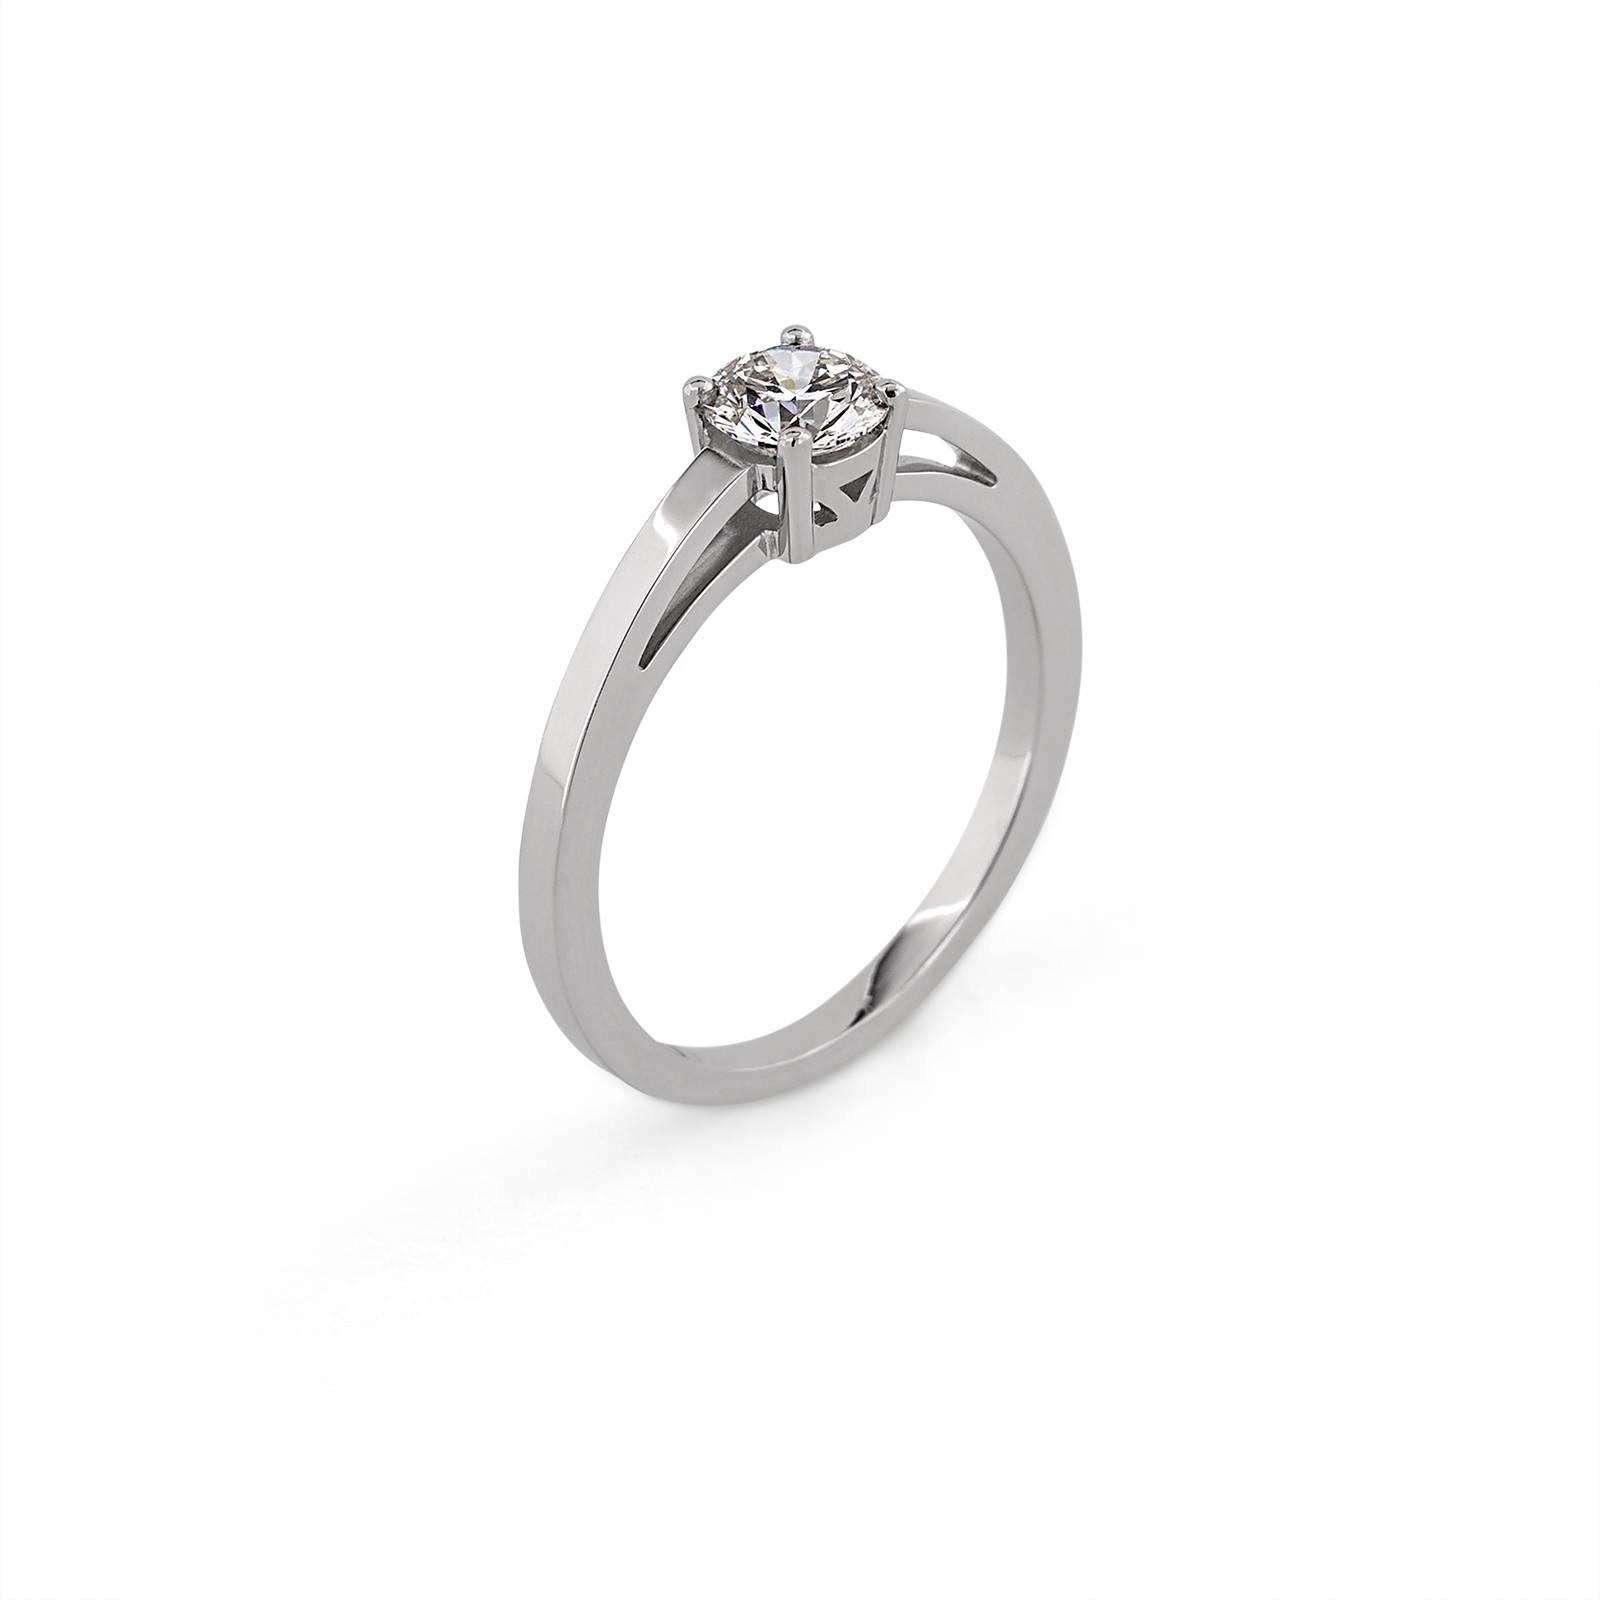 Sophia inspired by Sophia Hedwig van Brunswick-Lüneburg

Inspired by the simple sophistication of young lovers, Sophia and Ernest Casimir. This House of Eléonore engagement ring was designed to reflect their modest yet striking romance.

A